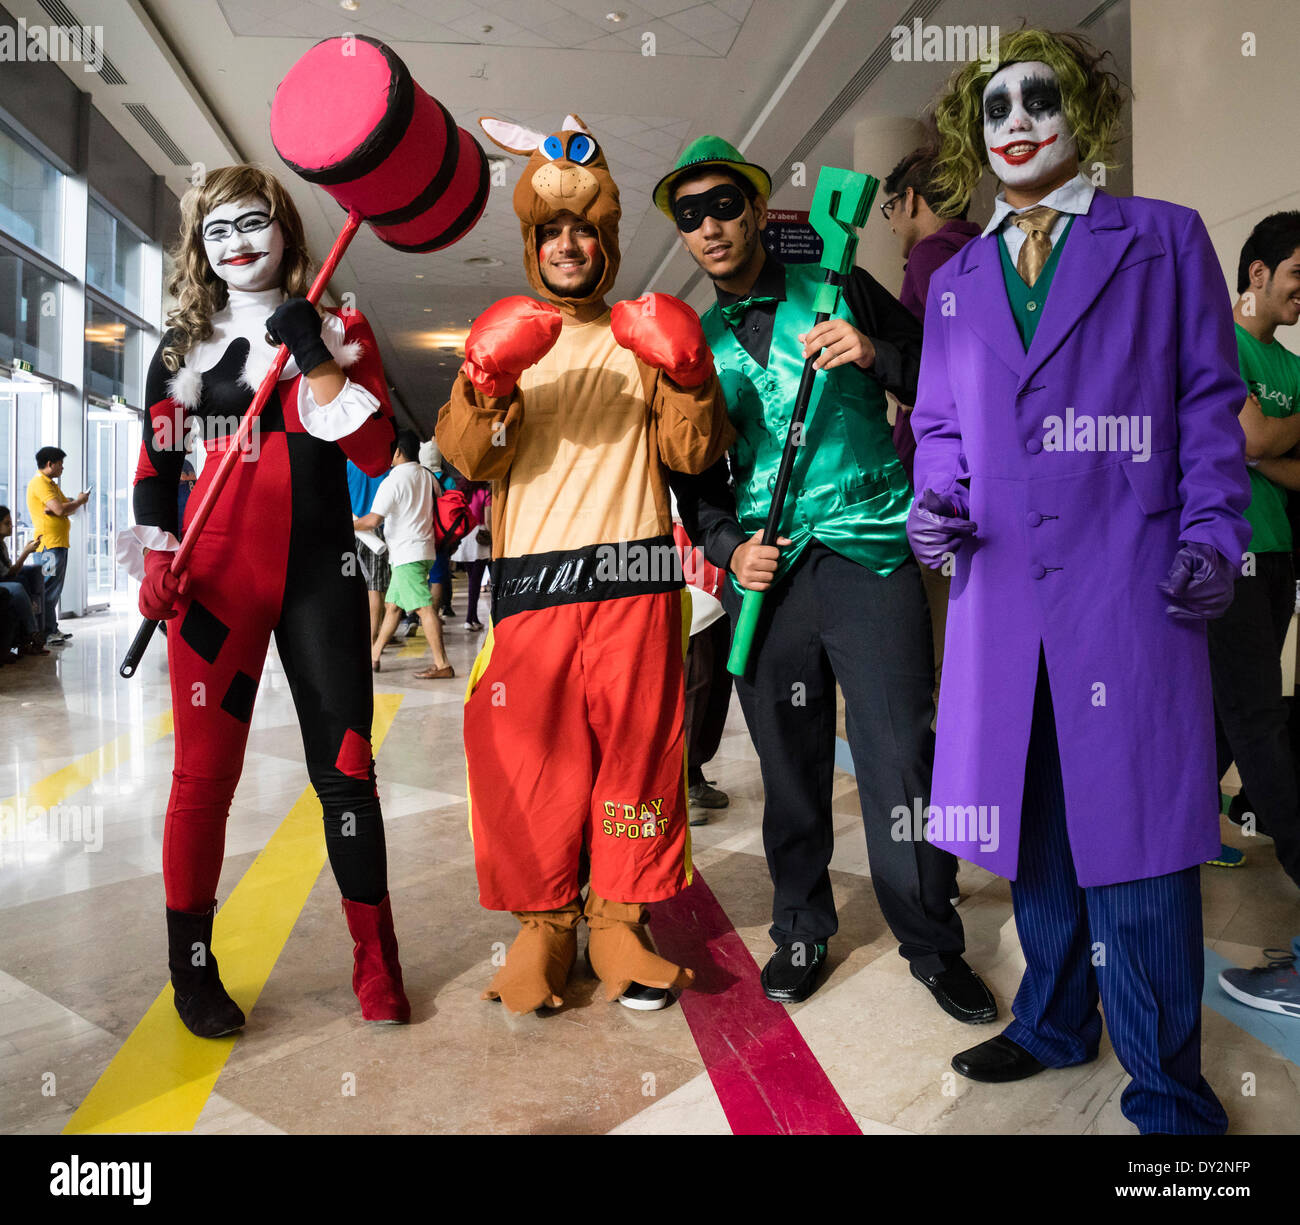 Dubai, 4th April 2014; fans in costume at the 2014 Middle East Film and Comic Con at World Trade Centre in Dubai United Arab Emirates Credit:  Iain Masterton/Alamy Live News Stock Photo